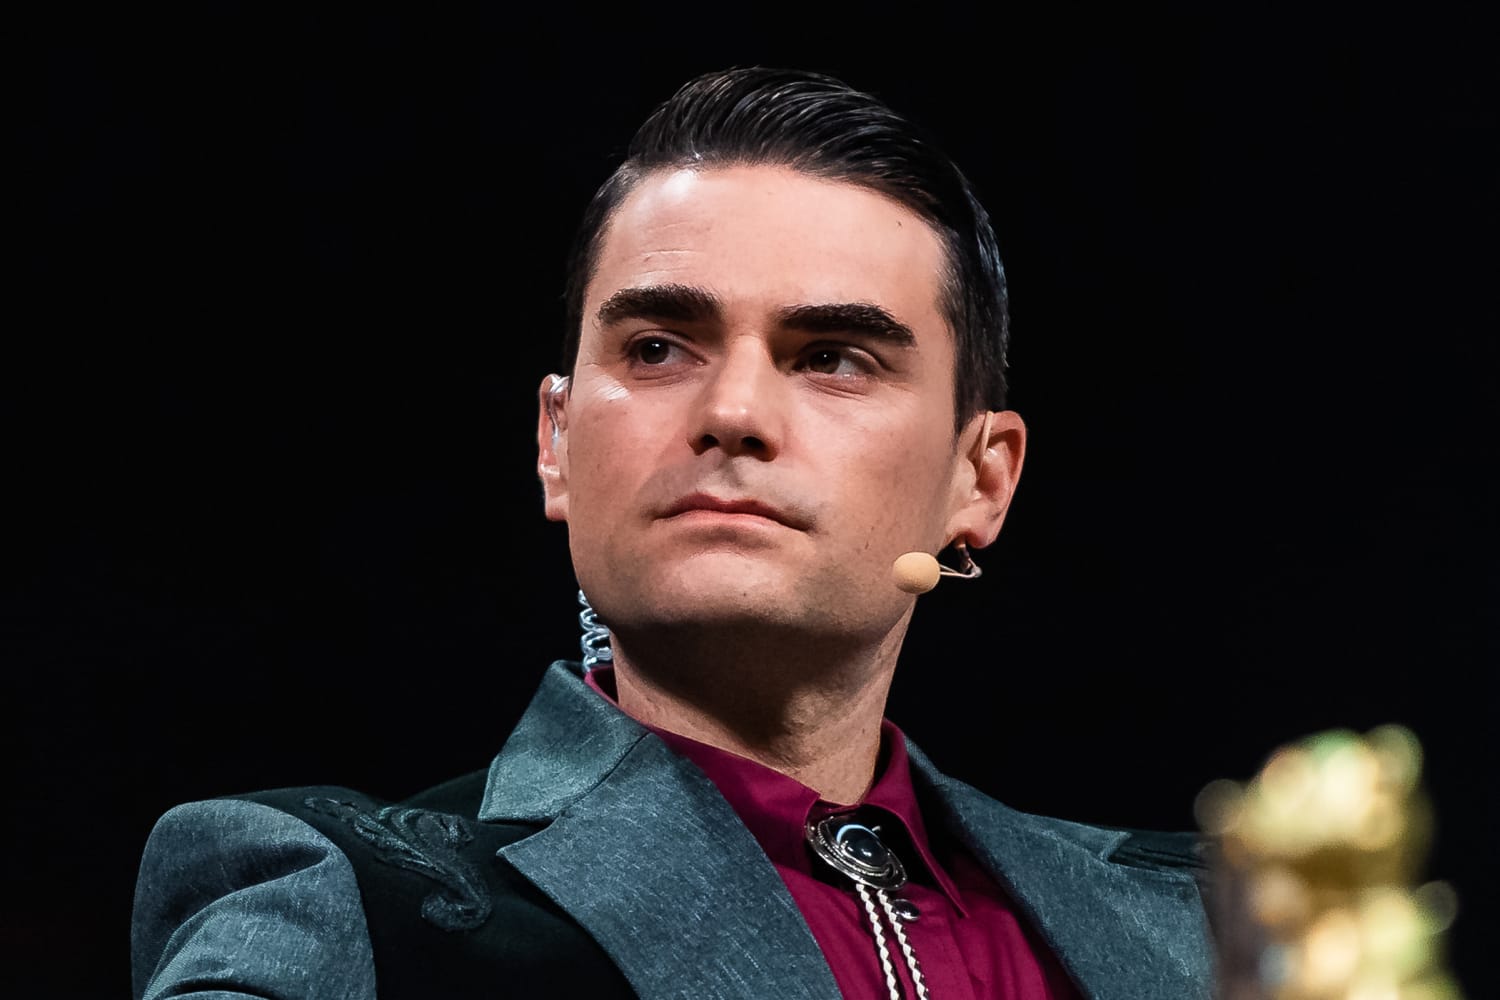 Ben Shapiro’s Debut In The Rap Game Sparks Controversy